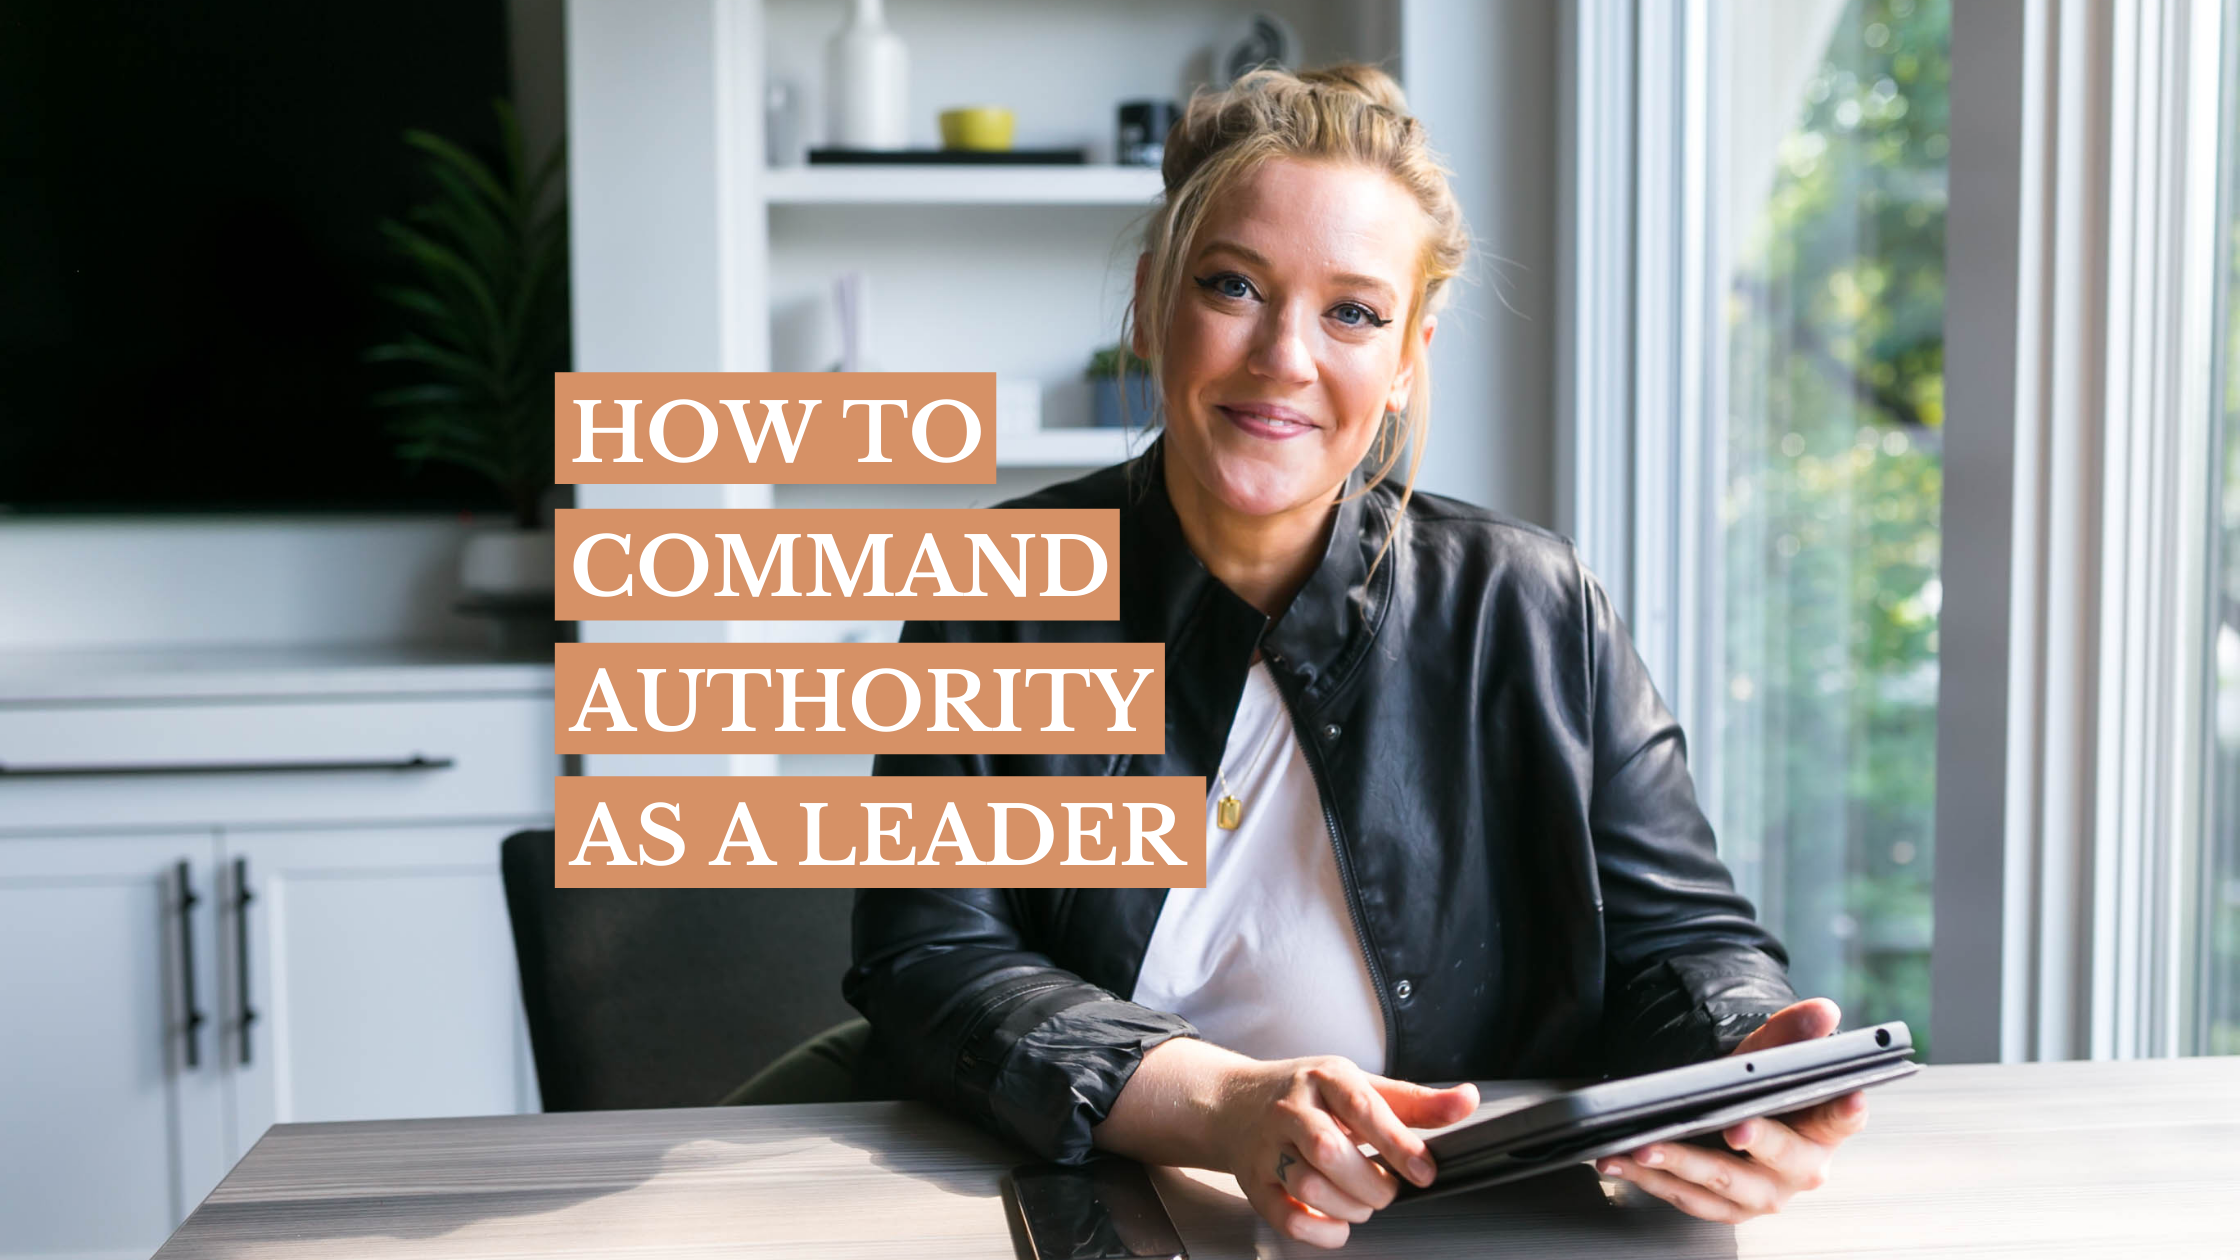 leadership-coach-female-ceo-command-authority-as-a-leader.png